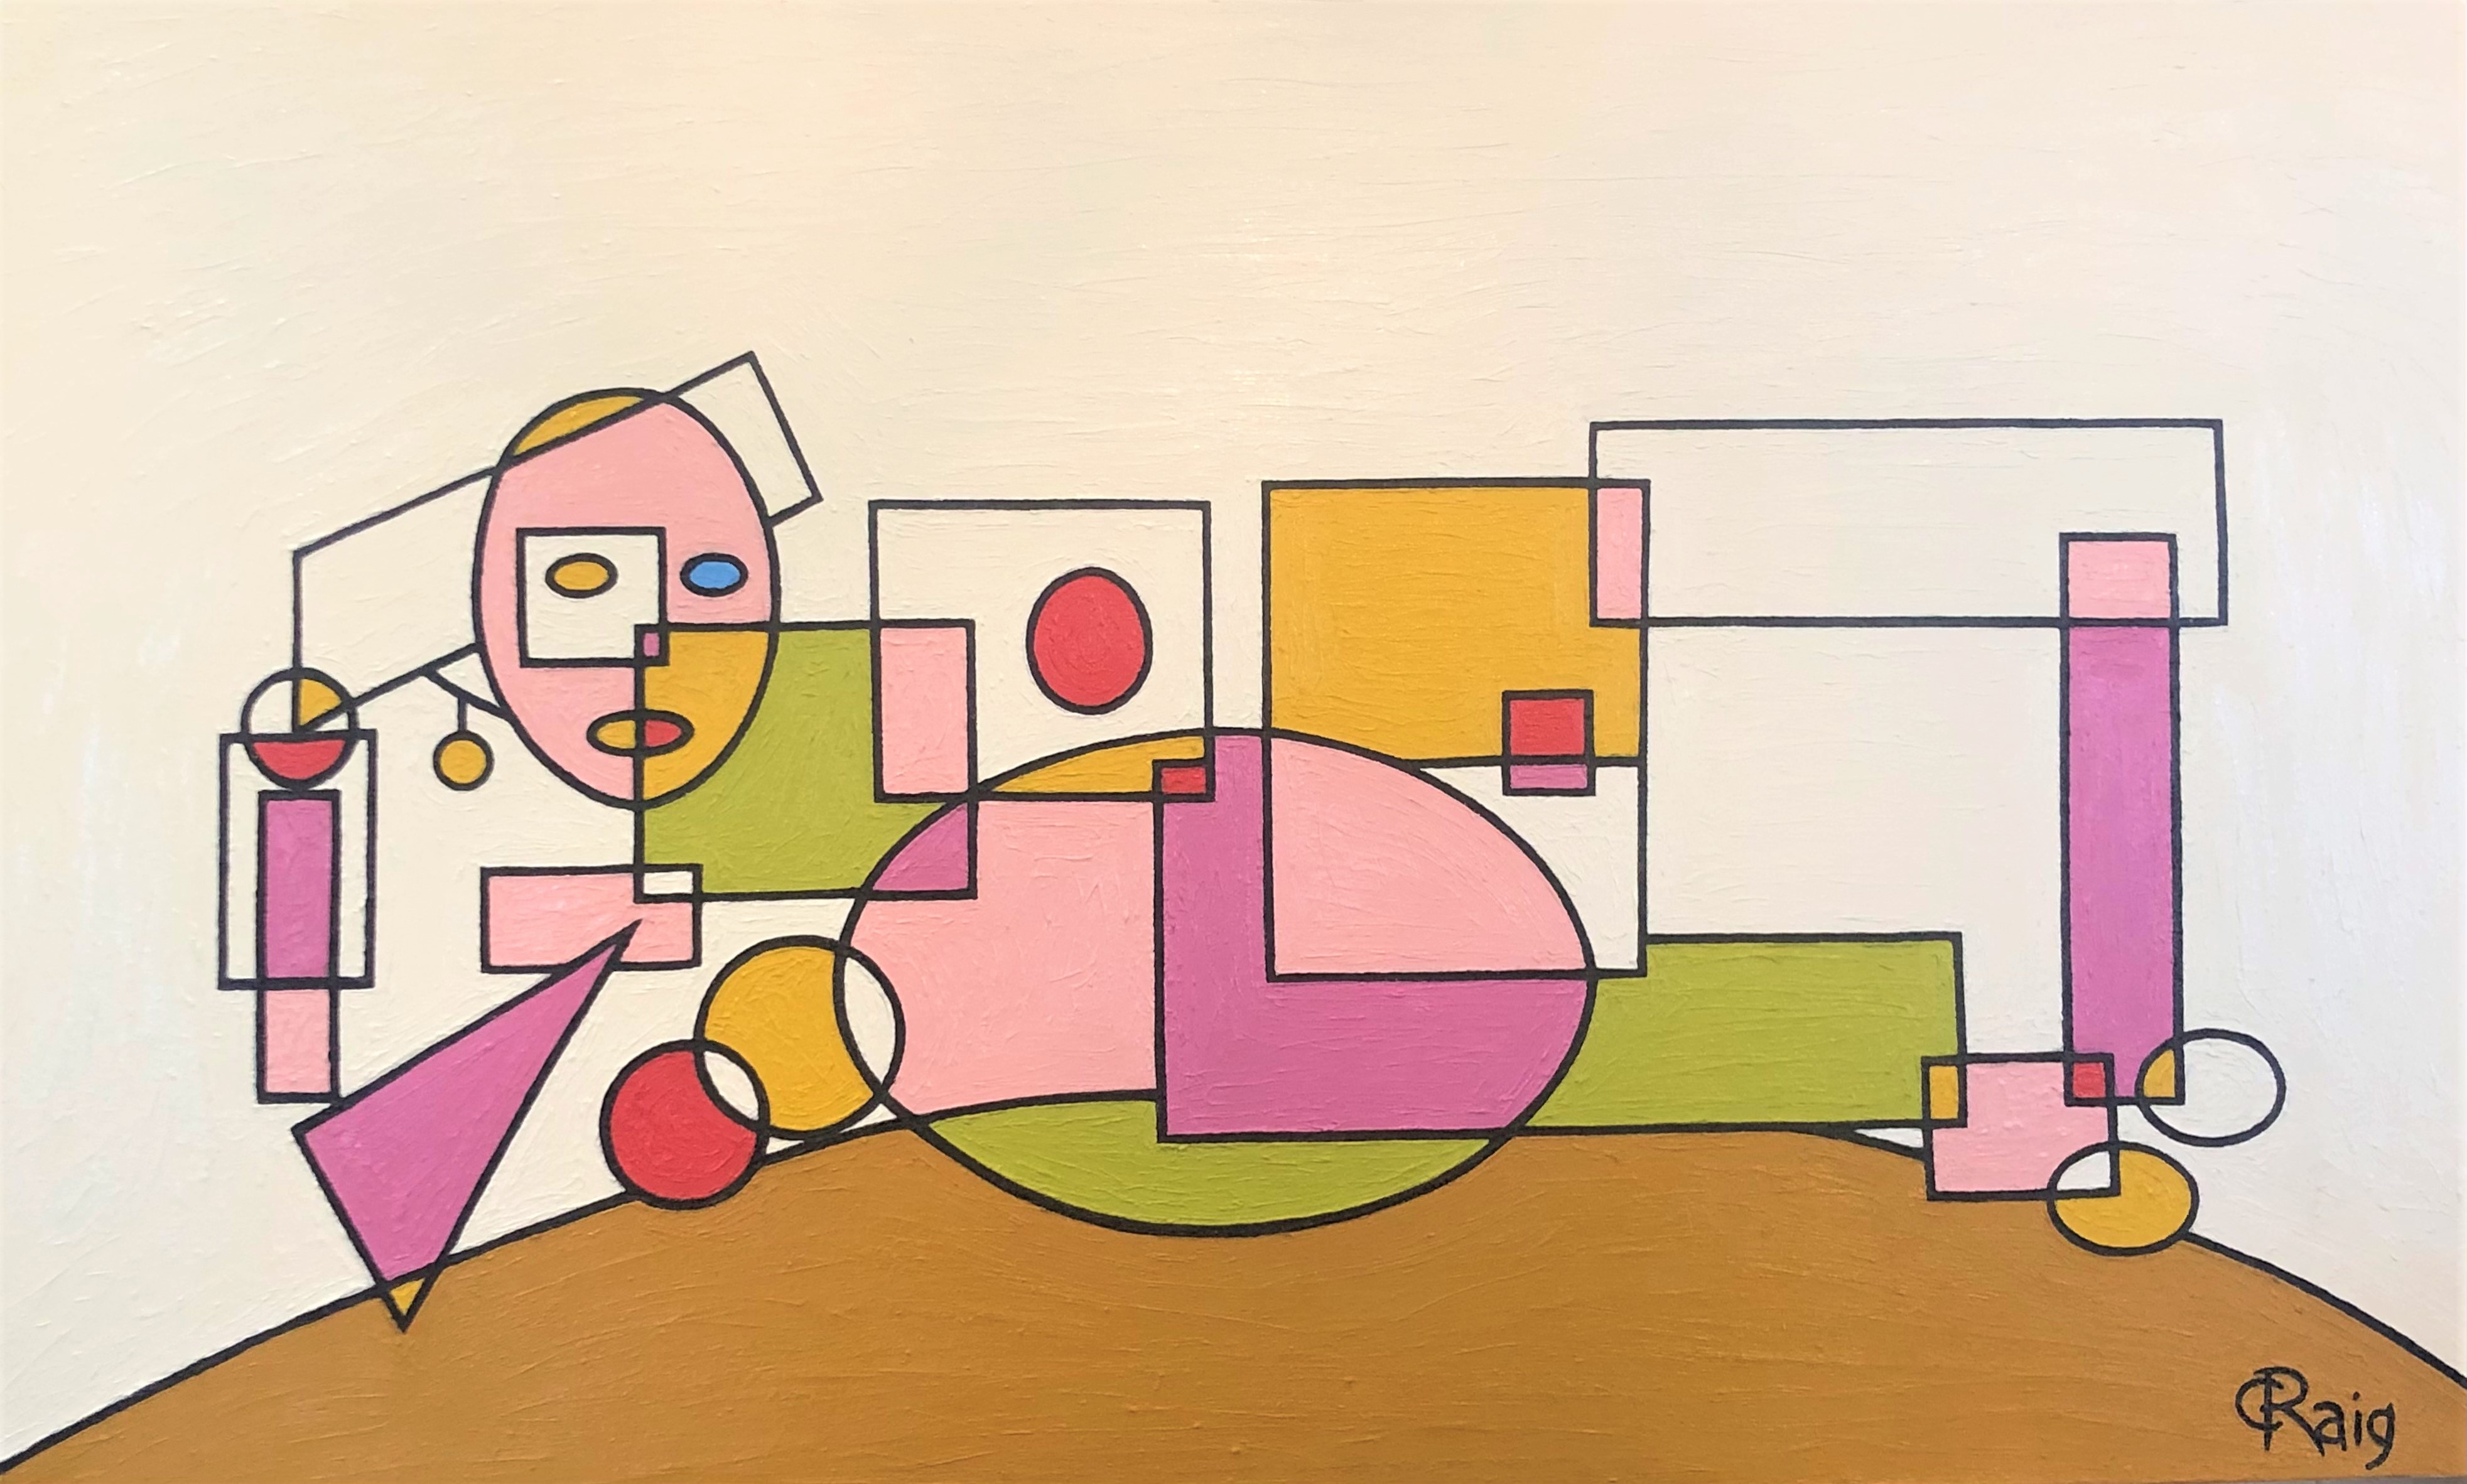 Painting: SHAPELY WOMAN, 29 by 48 inches